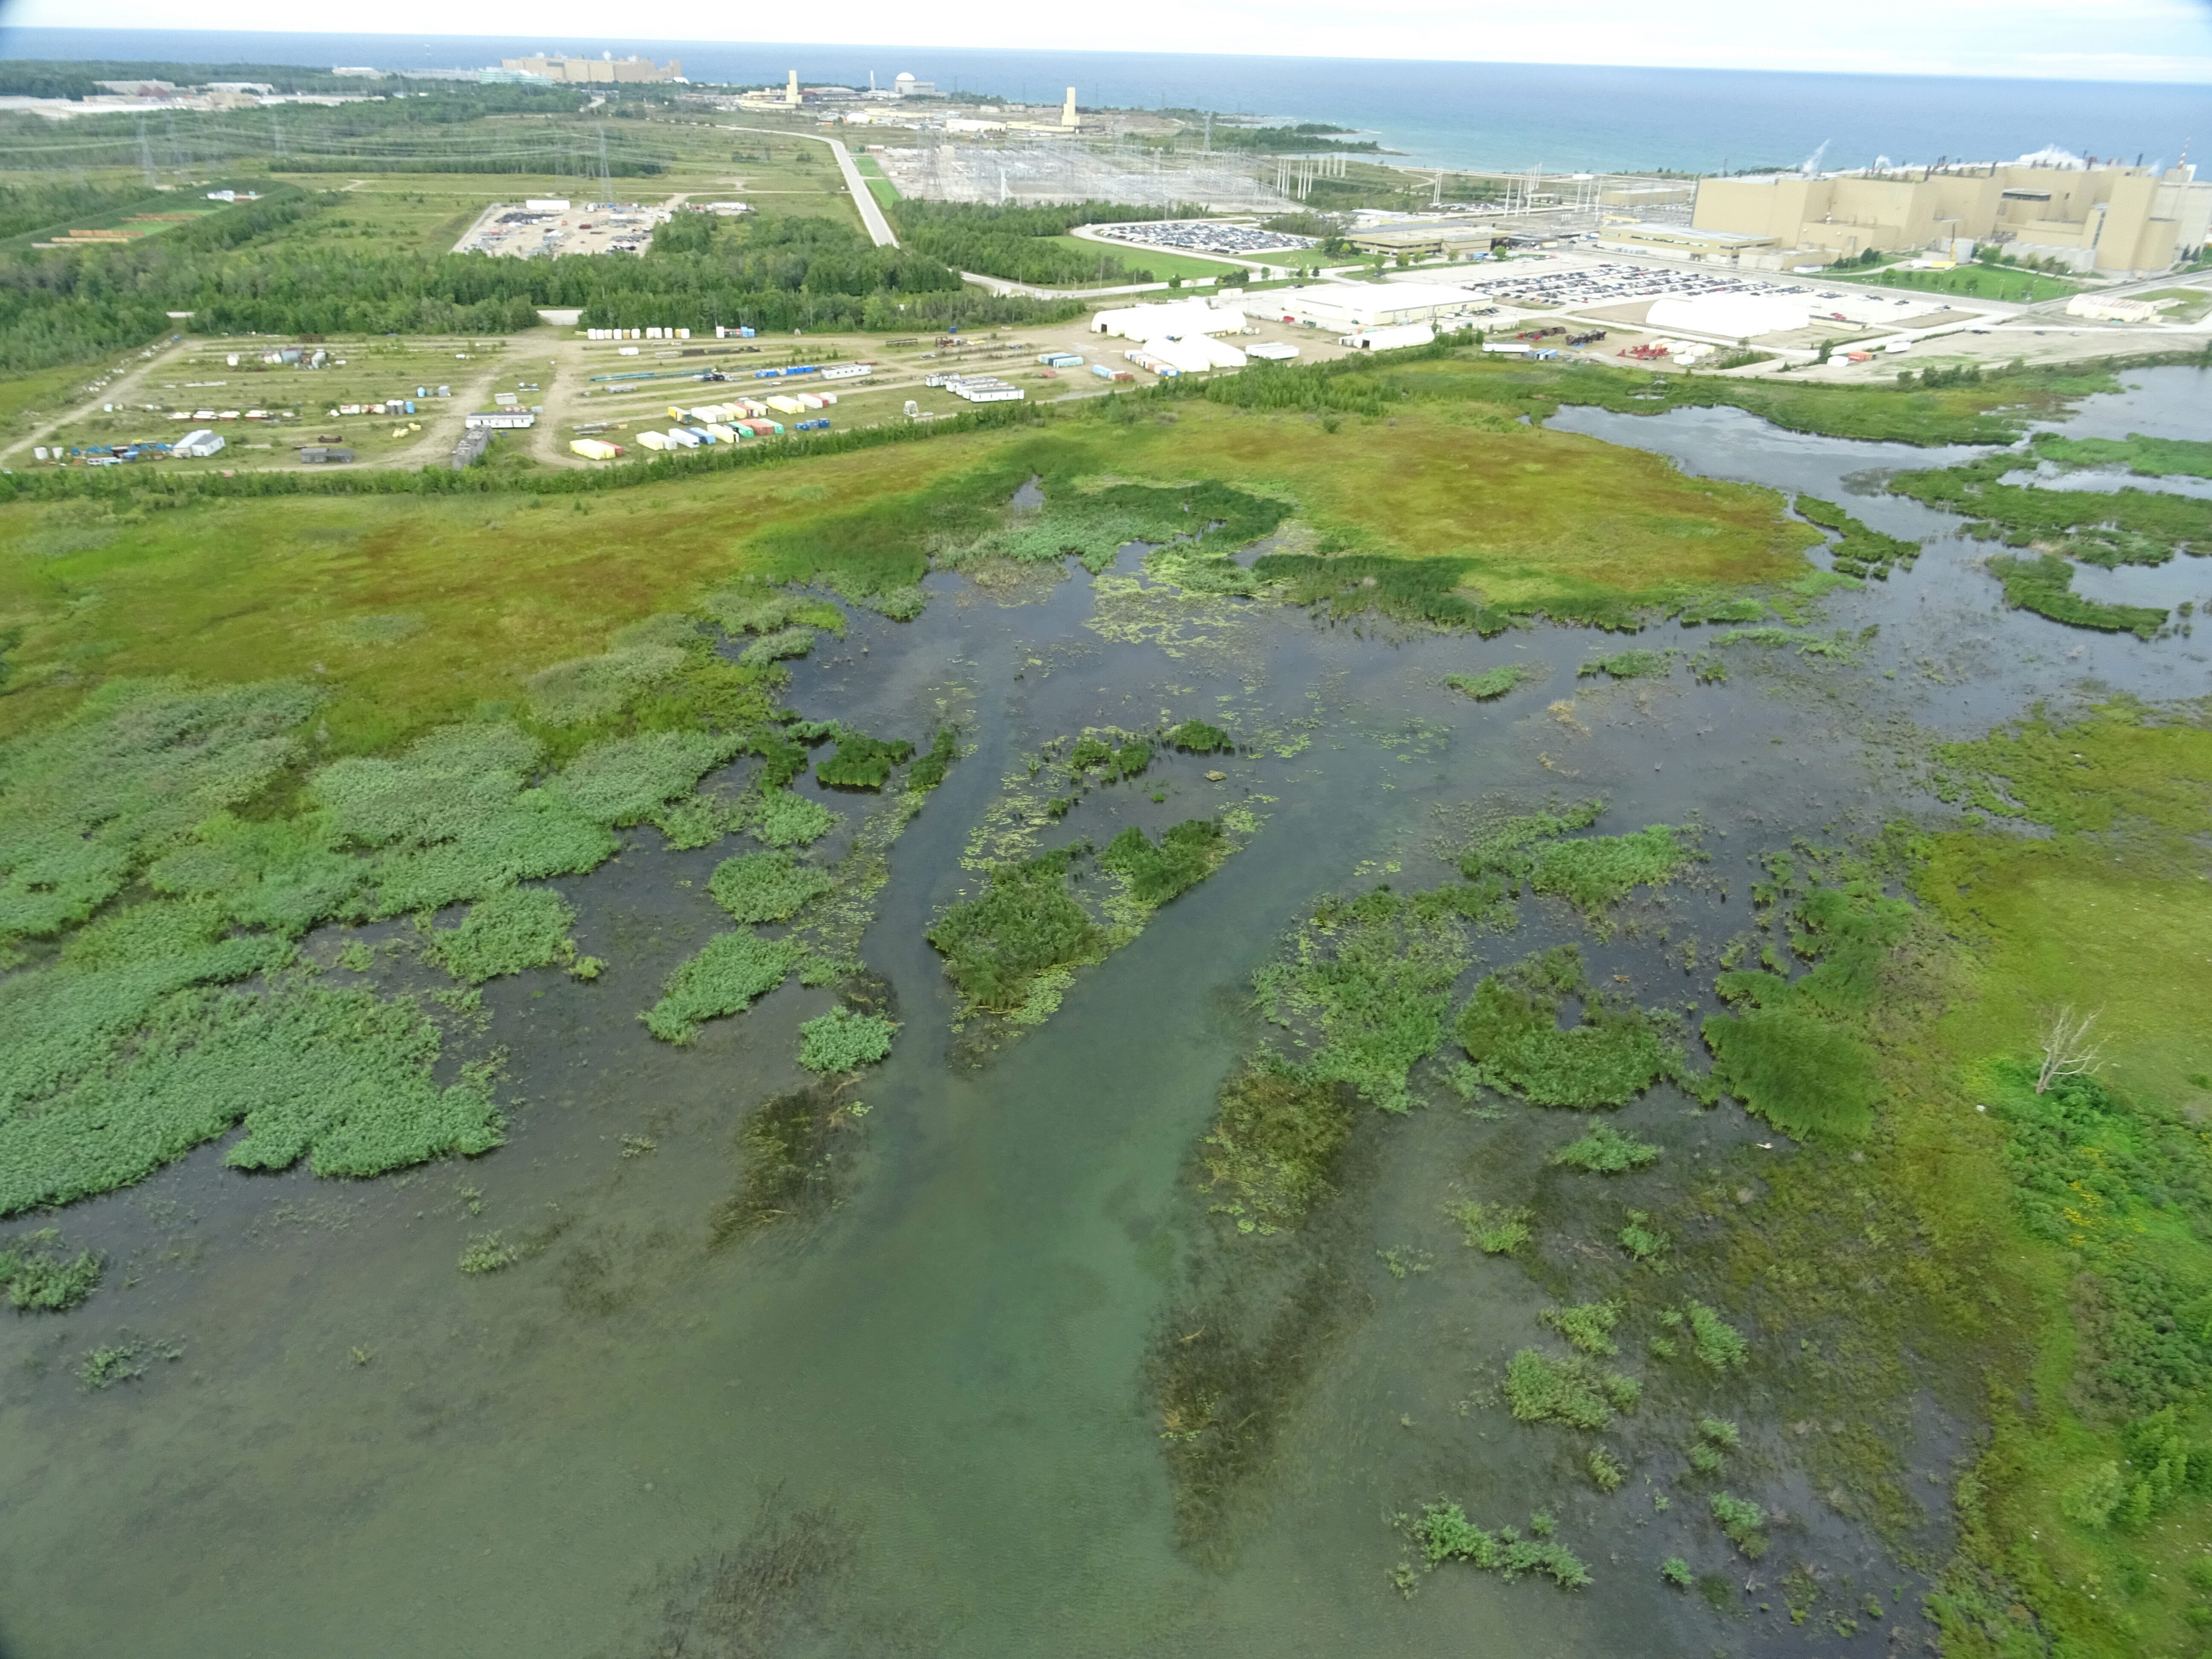 We deployed drones to help survey the growth of invasive Phragmites near the Western Waste Management Facility in Bruce County.